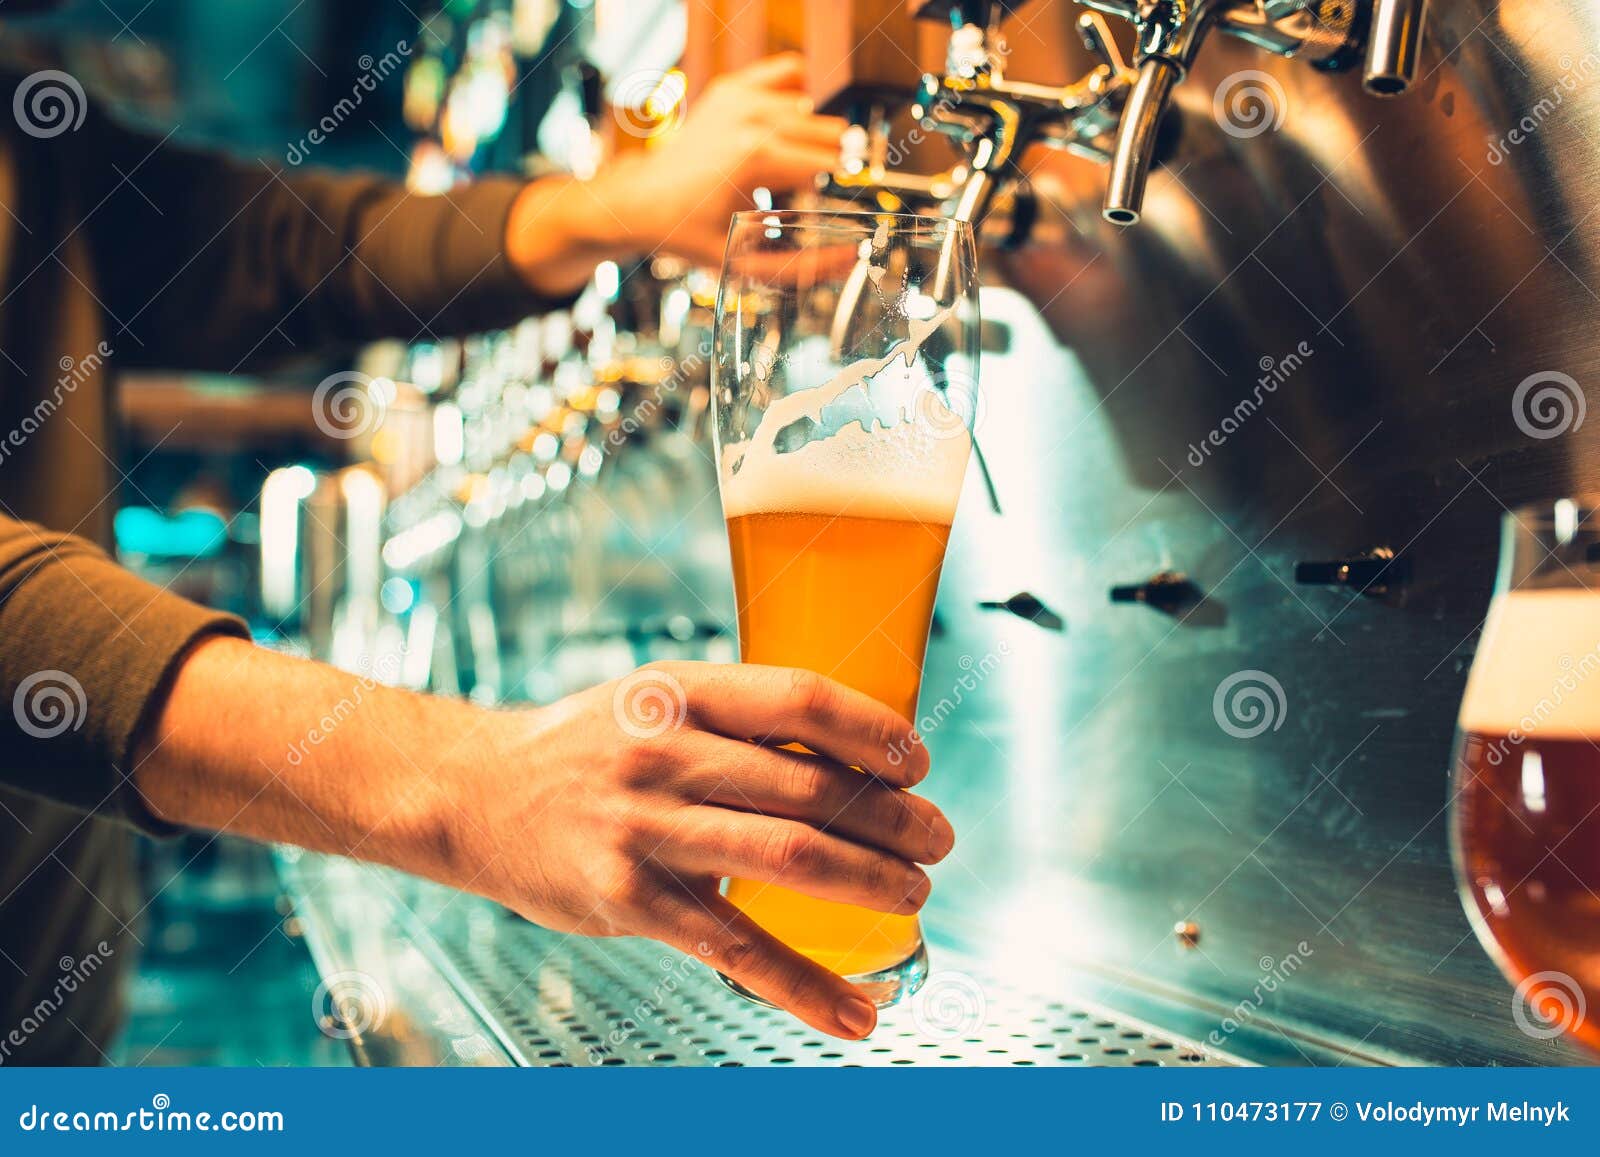 hand of bartender pouring a large lager beer in tap.